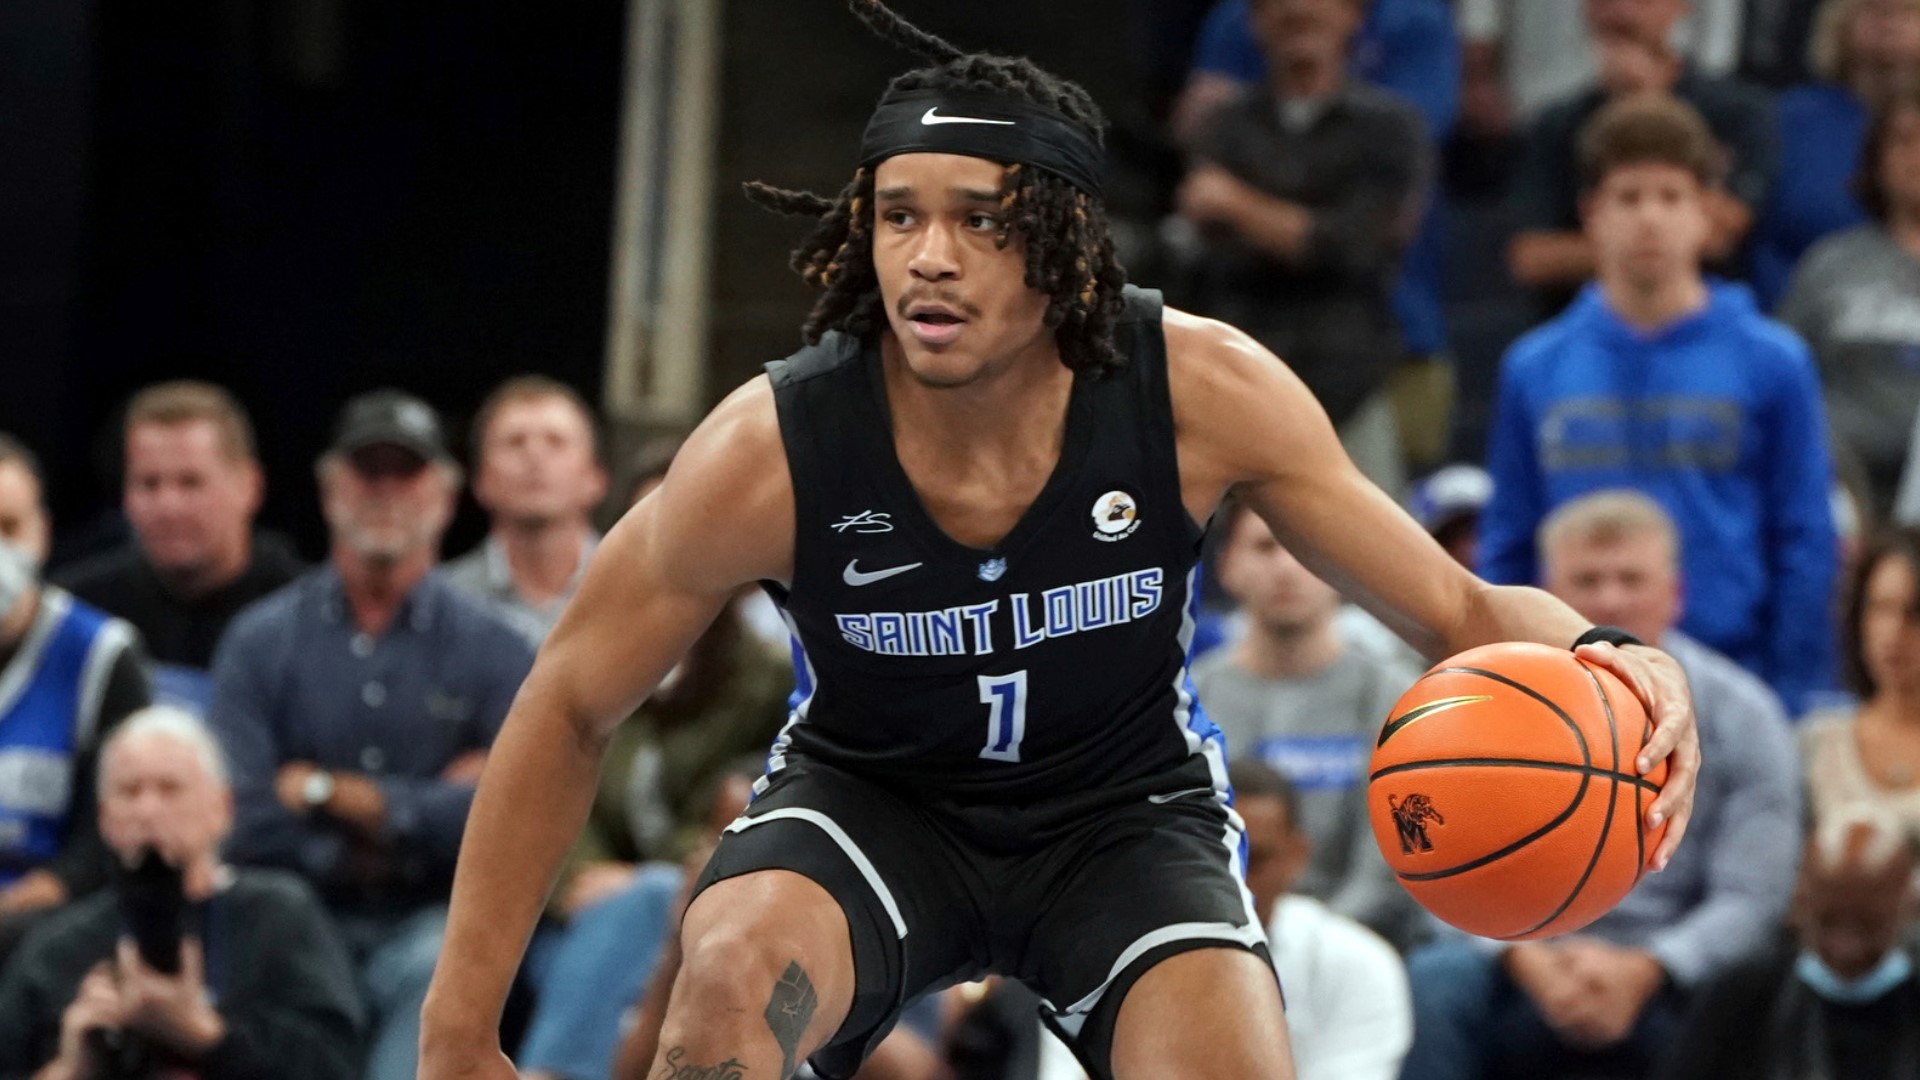 A St. Louis native, Collins led the entire NCAA in assists last year with the Billikens. Now, he's looking for a new home.